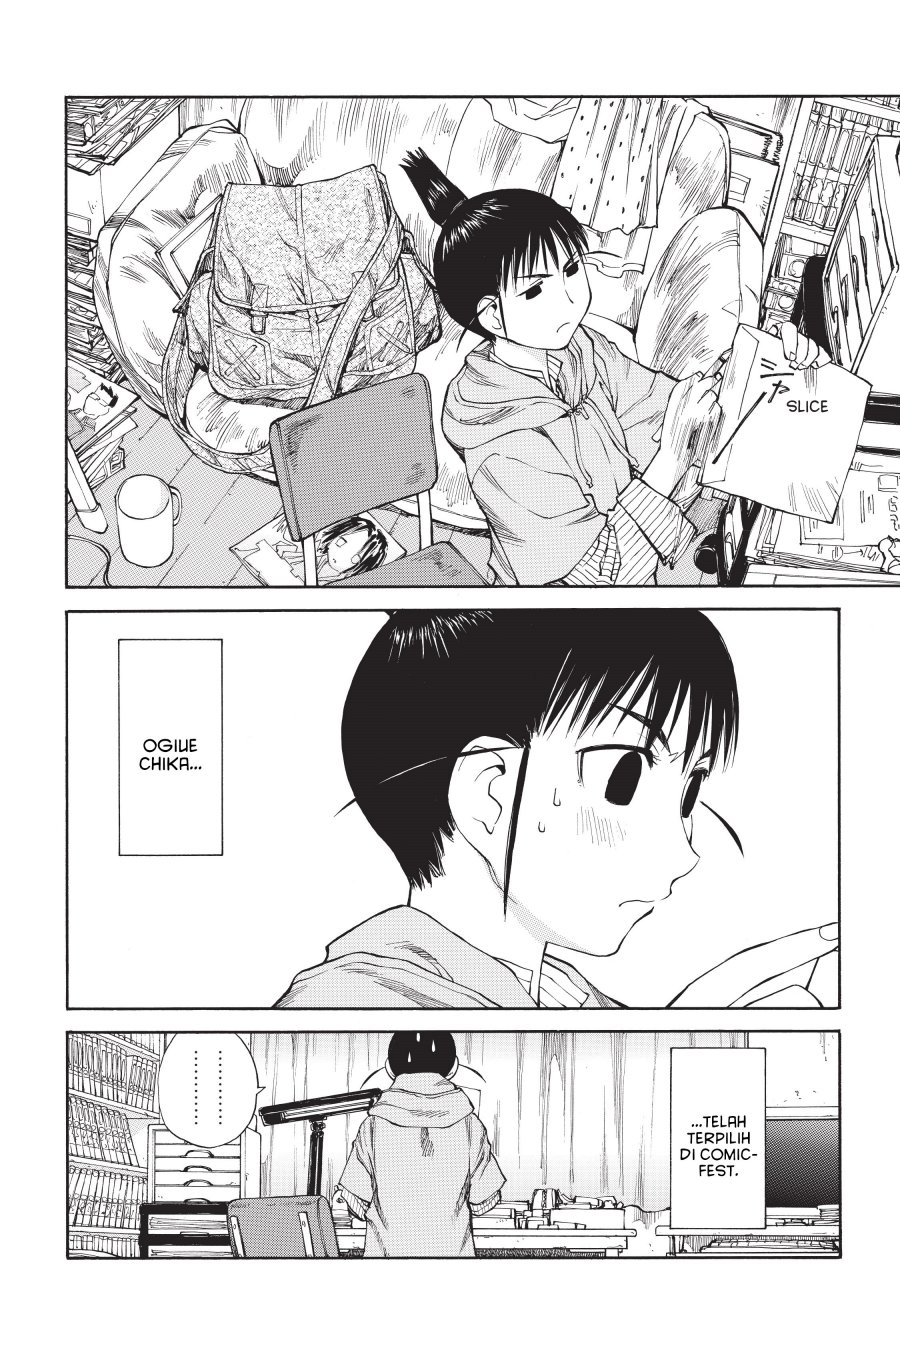 Genshiken – The Society for the Study of Modern Visual Culture Chapter 38 Image 1